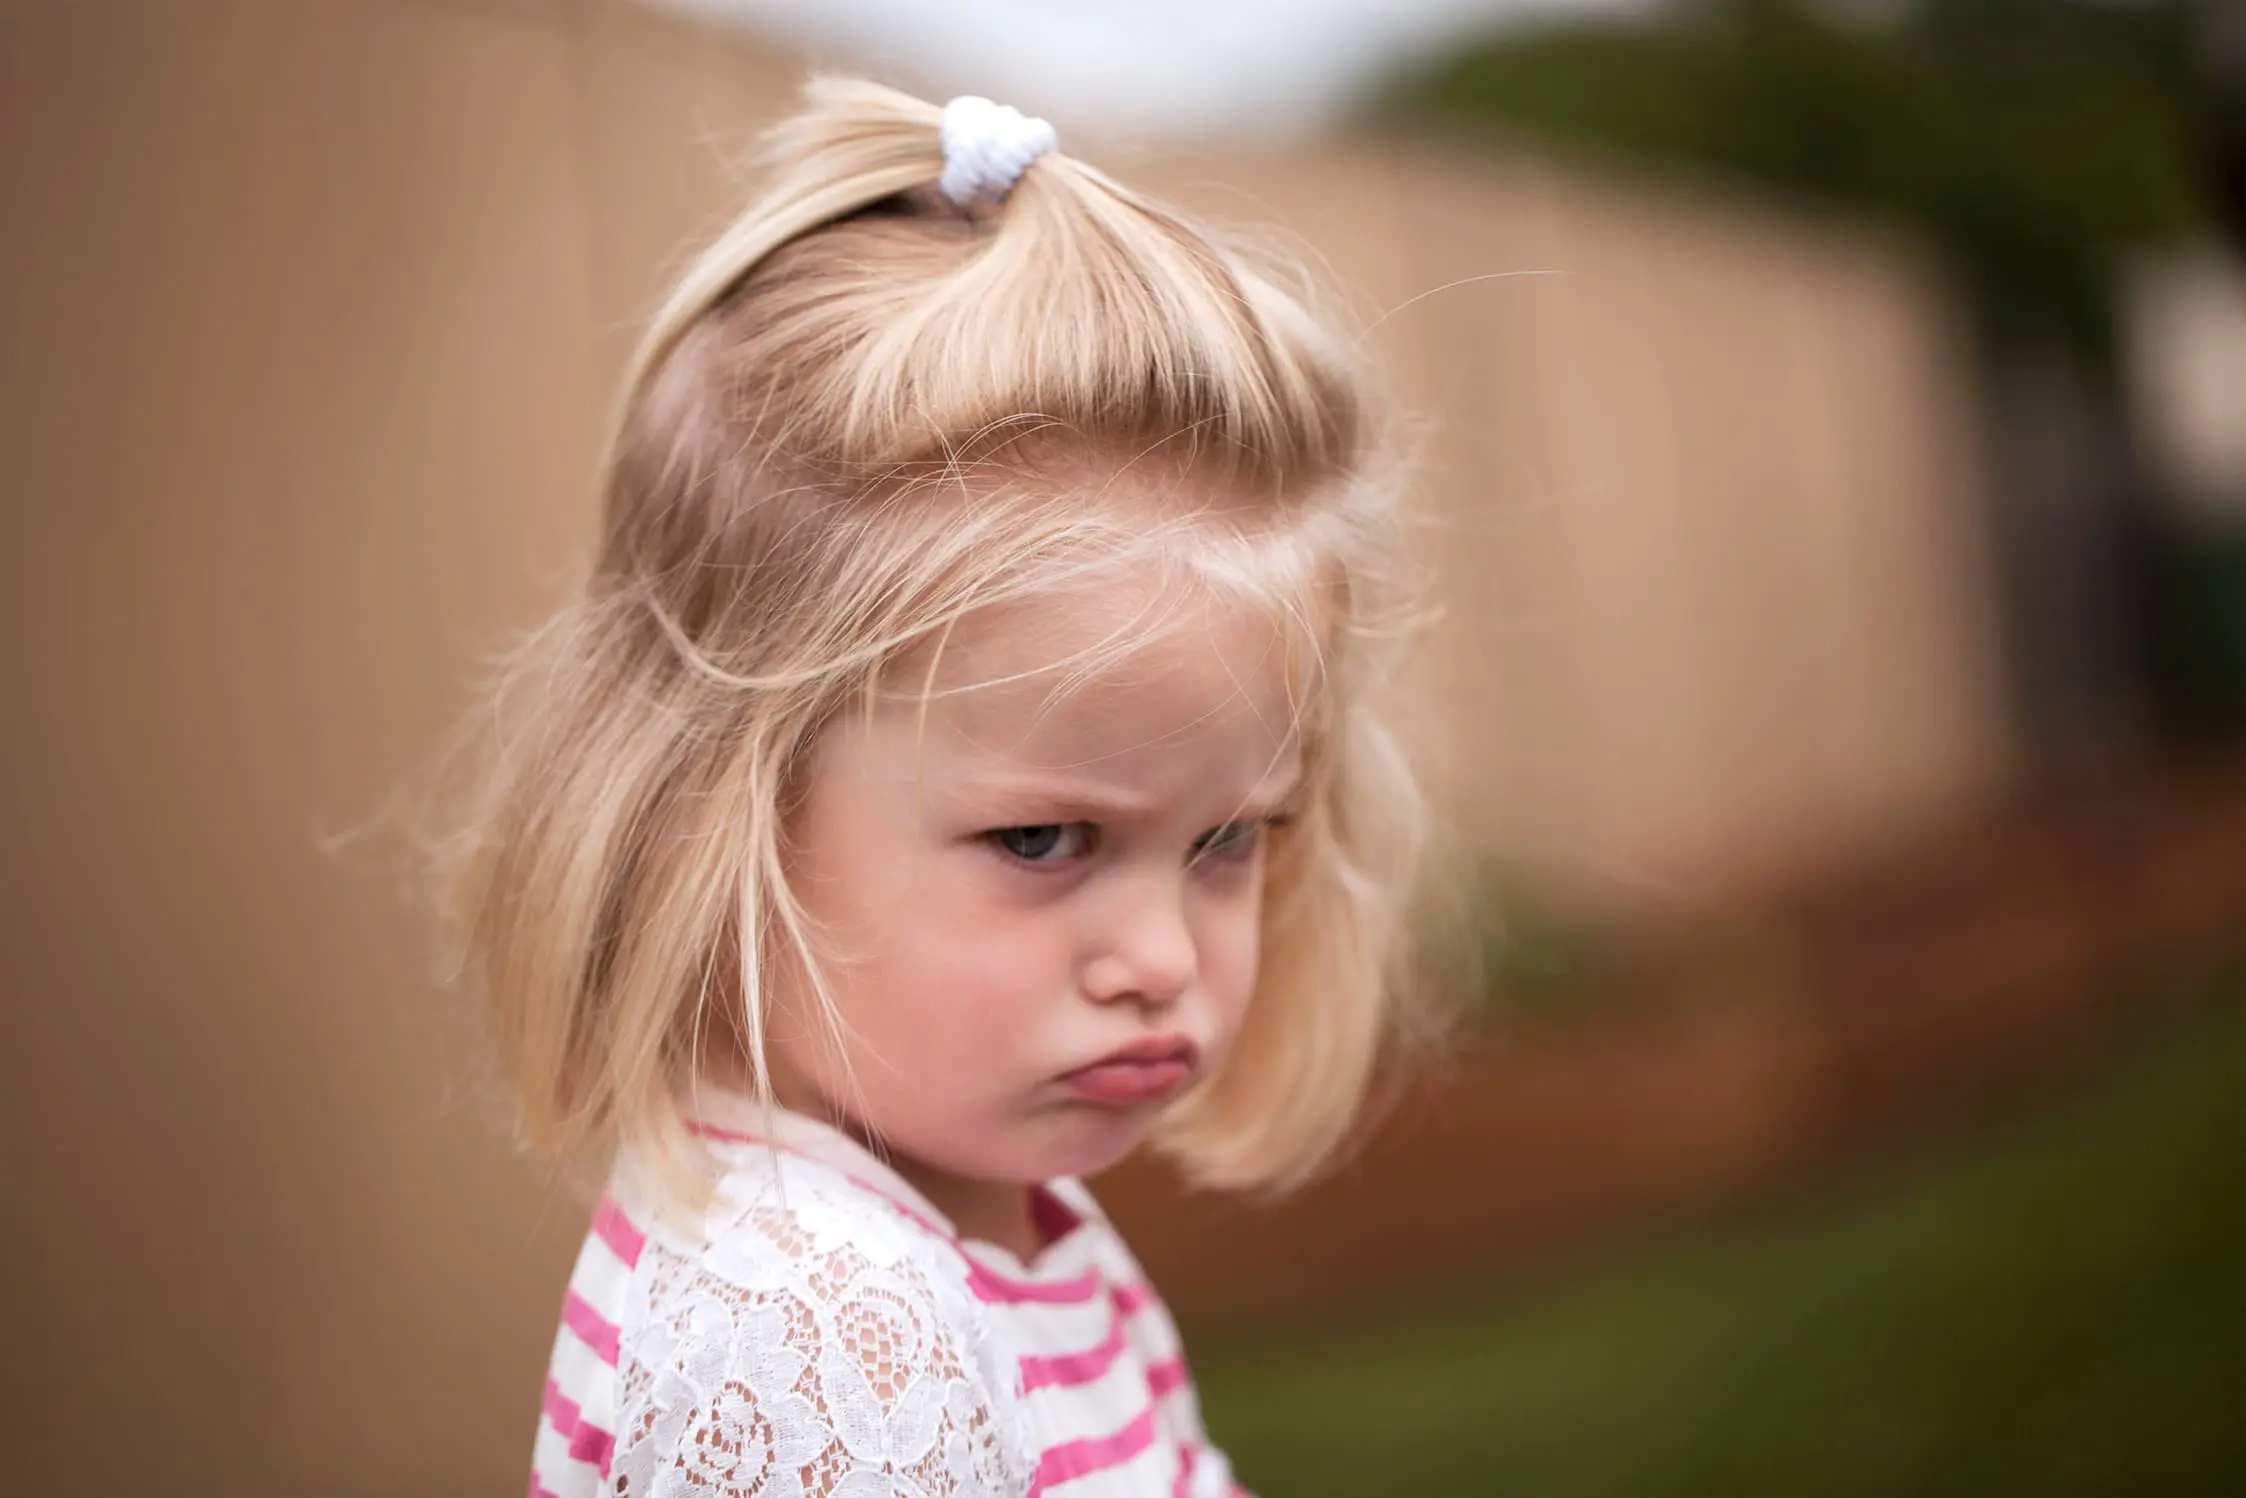 Young girl pulls a stroppy face